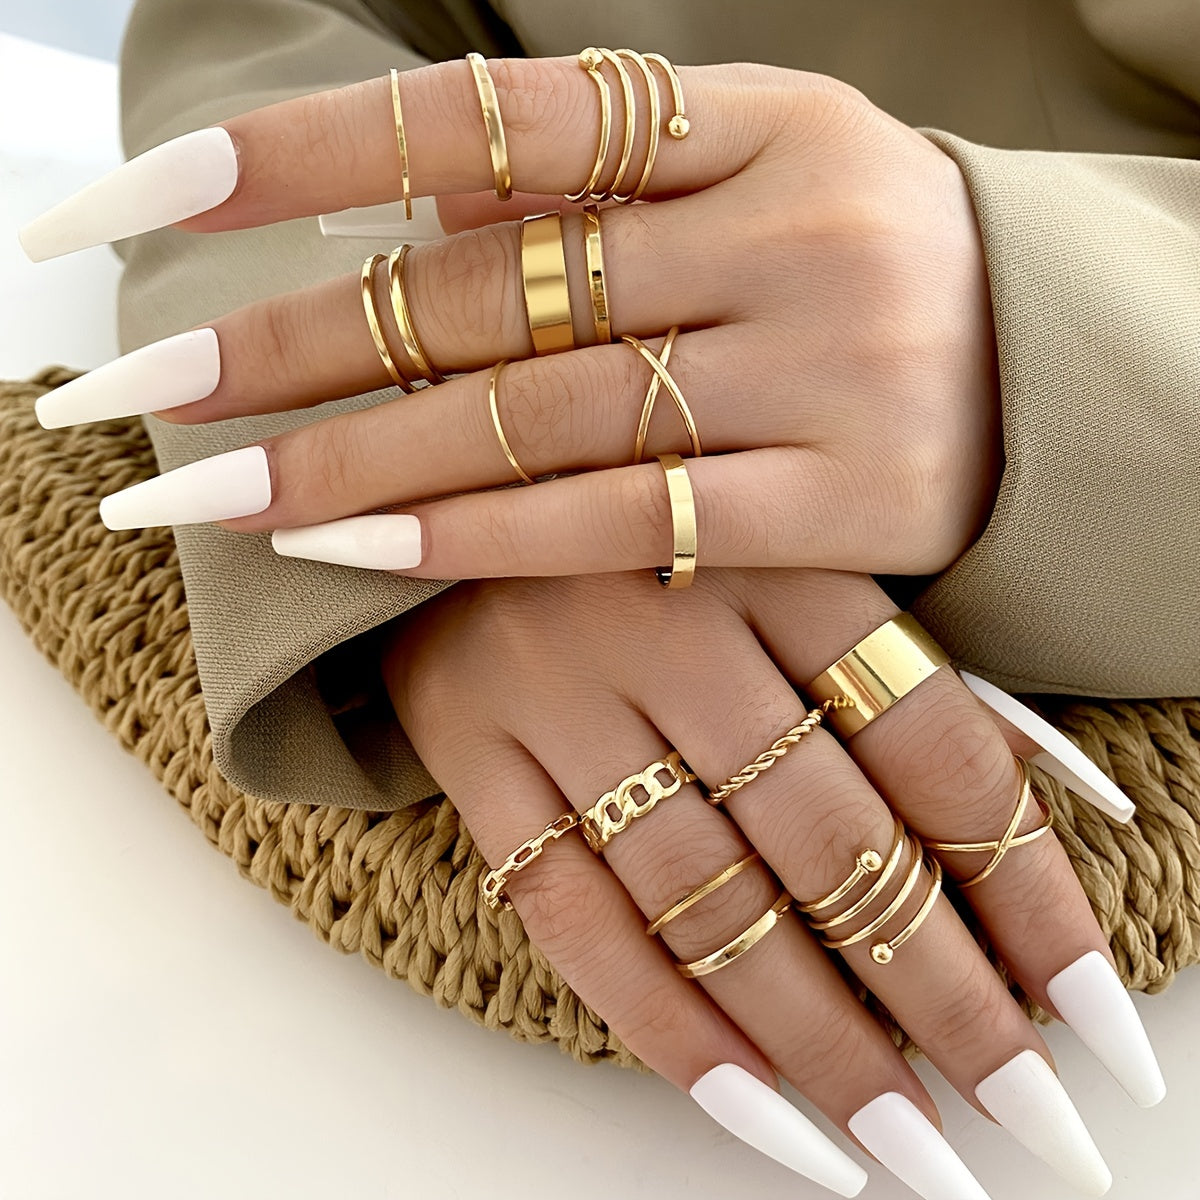 16pcs Set Women's Fashion Jewelry: Upgrade Your Look with a Stylish Geometric Surplice Ring!